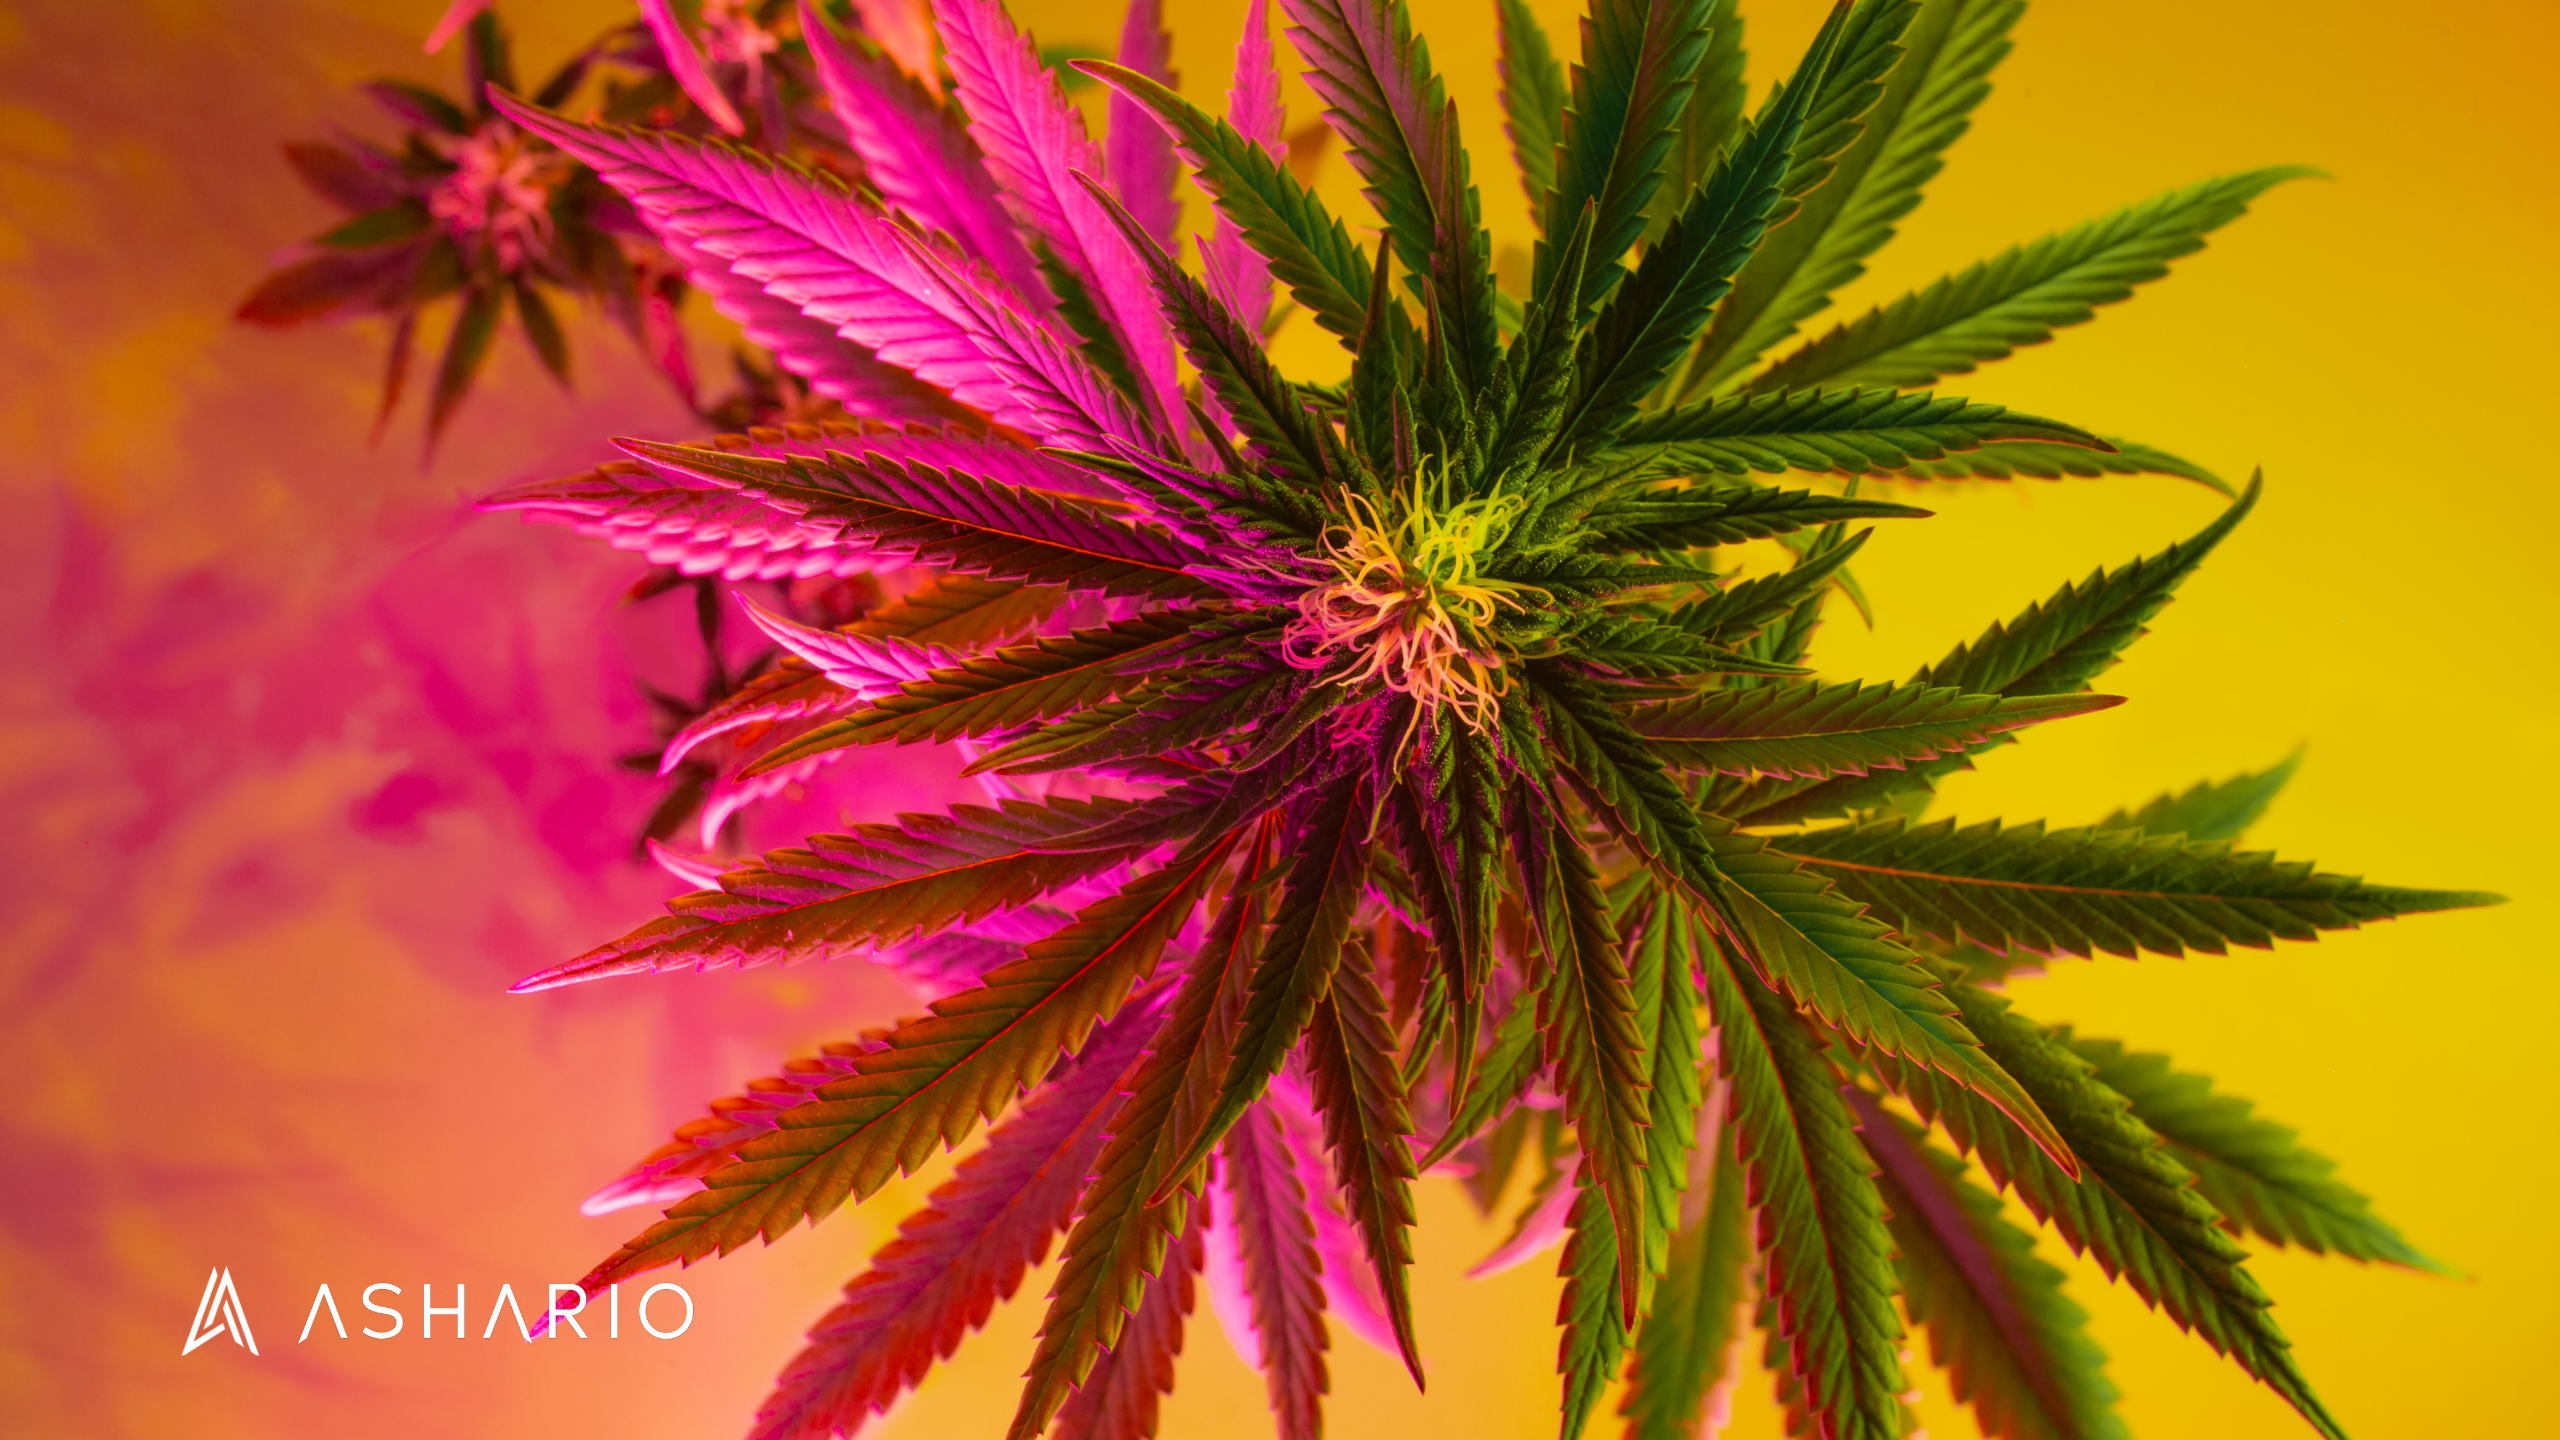 Embark on an exciting journey through the cannabis jungle with Ashario Cannabis as your guide. Explore the vast array of products and strains, from classic favorites to innovative newcomers, and discover the perfect options for your unique preferences.